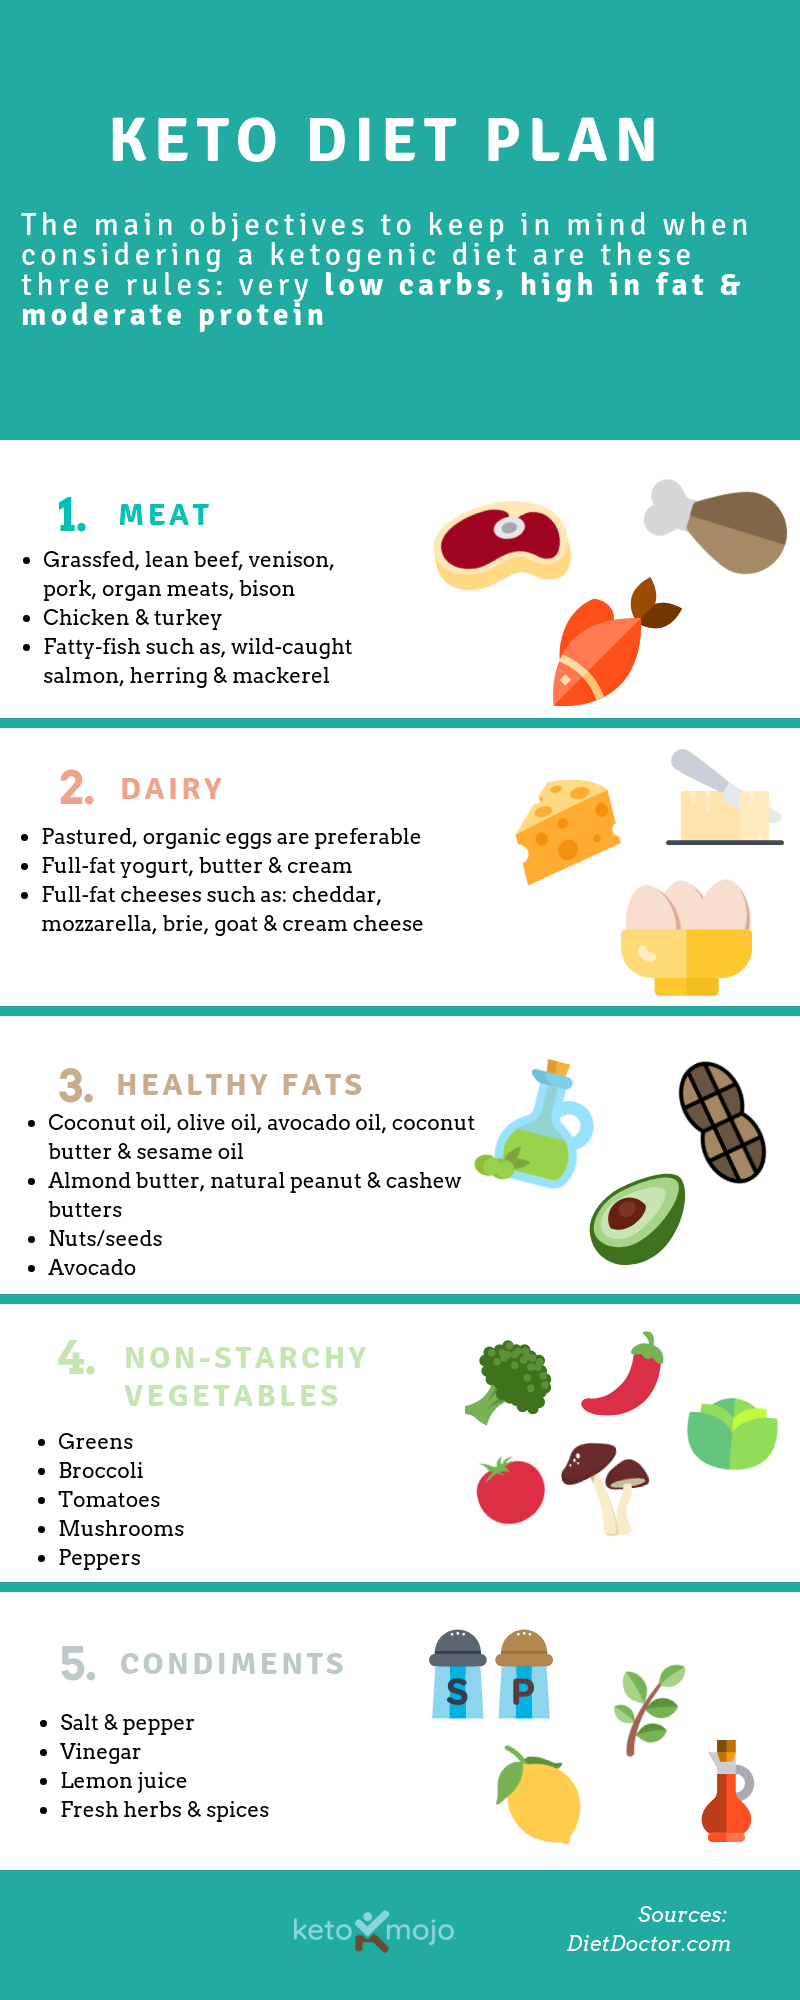 Here's The Deal With The Keto Diet And What You Should ...